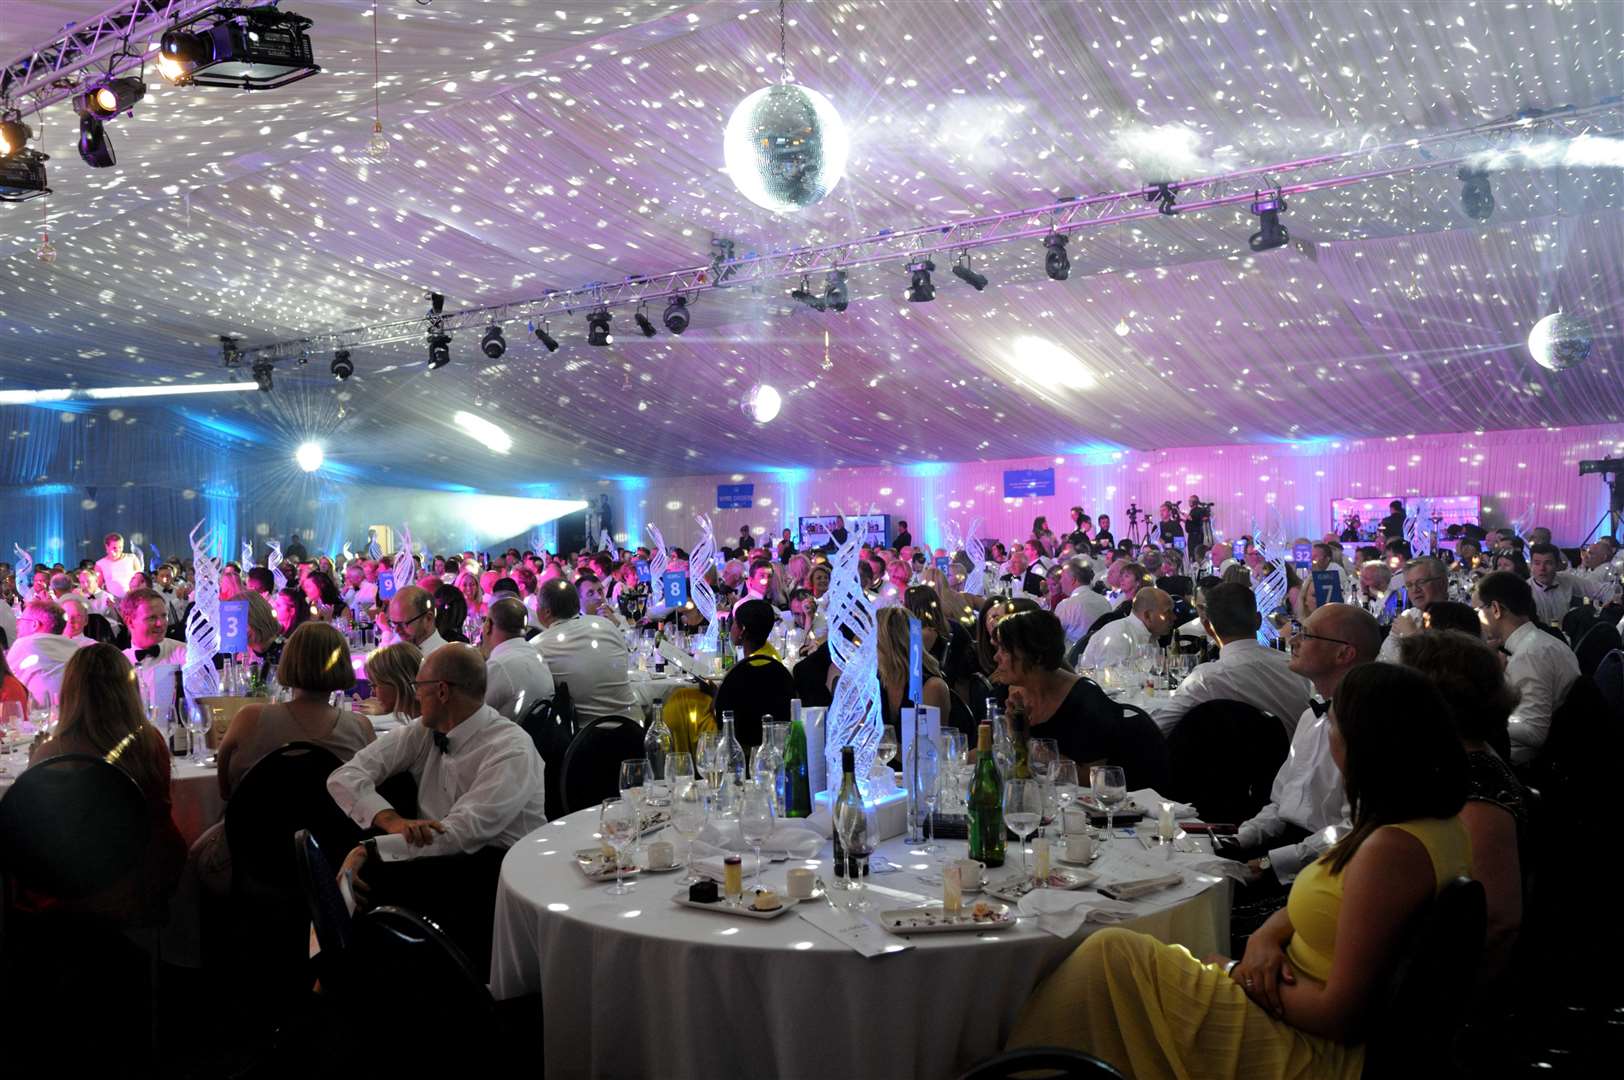 More than 600 people are expected to attend the gala evening